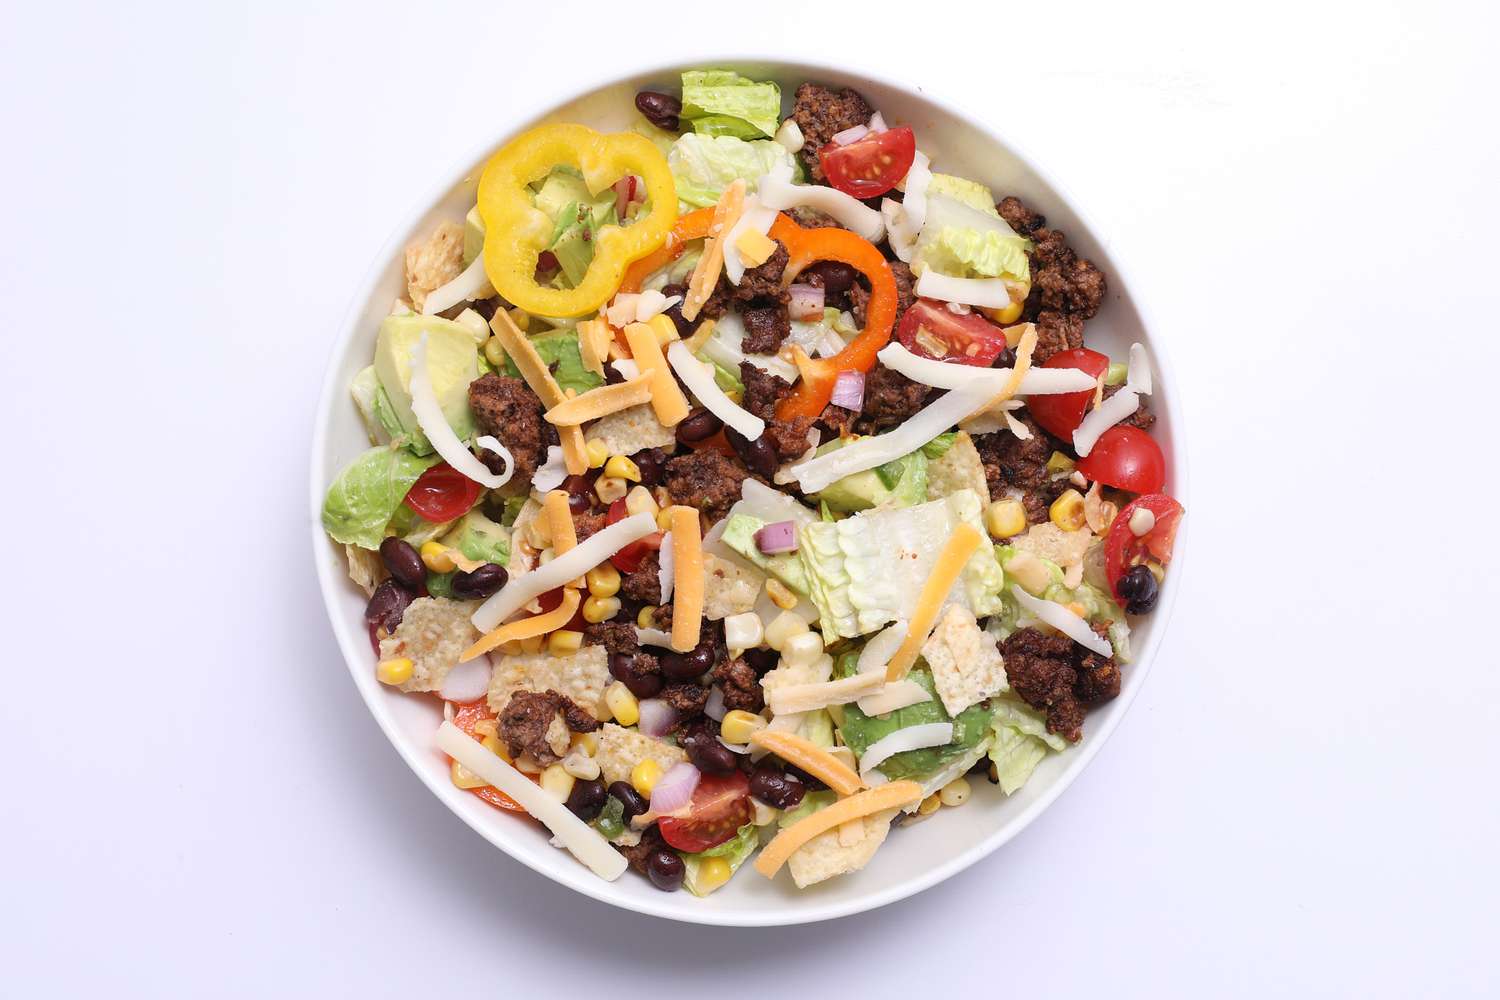 A bowl of taco salad showing romaine lettuce, ground beef, peppers, cherry tomatoes, and shredded cheese